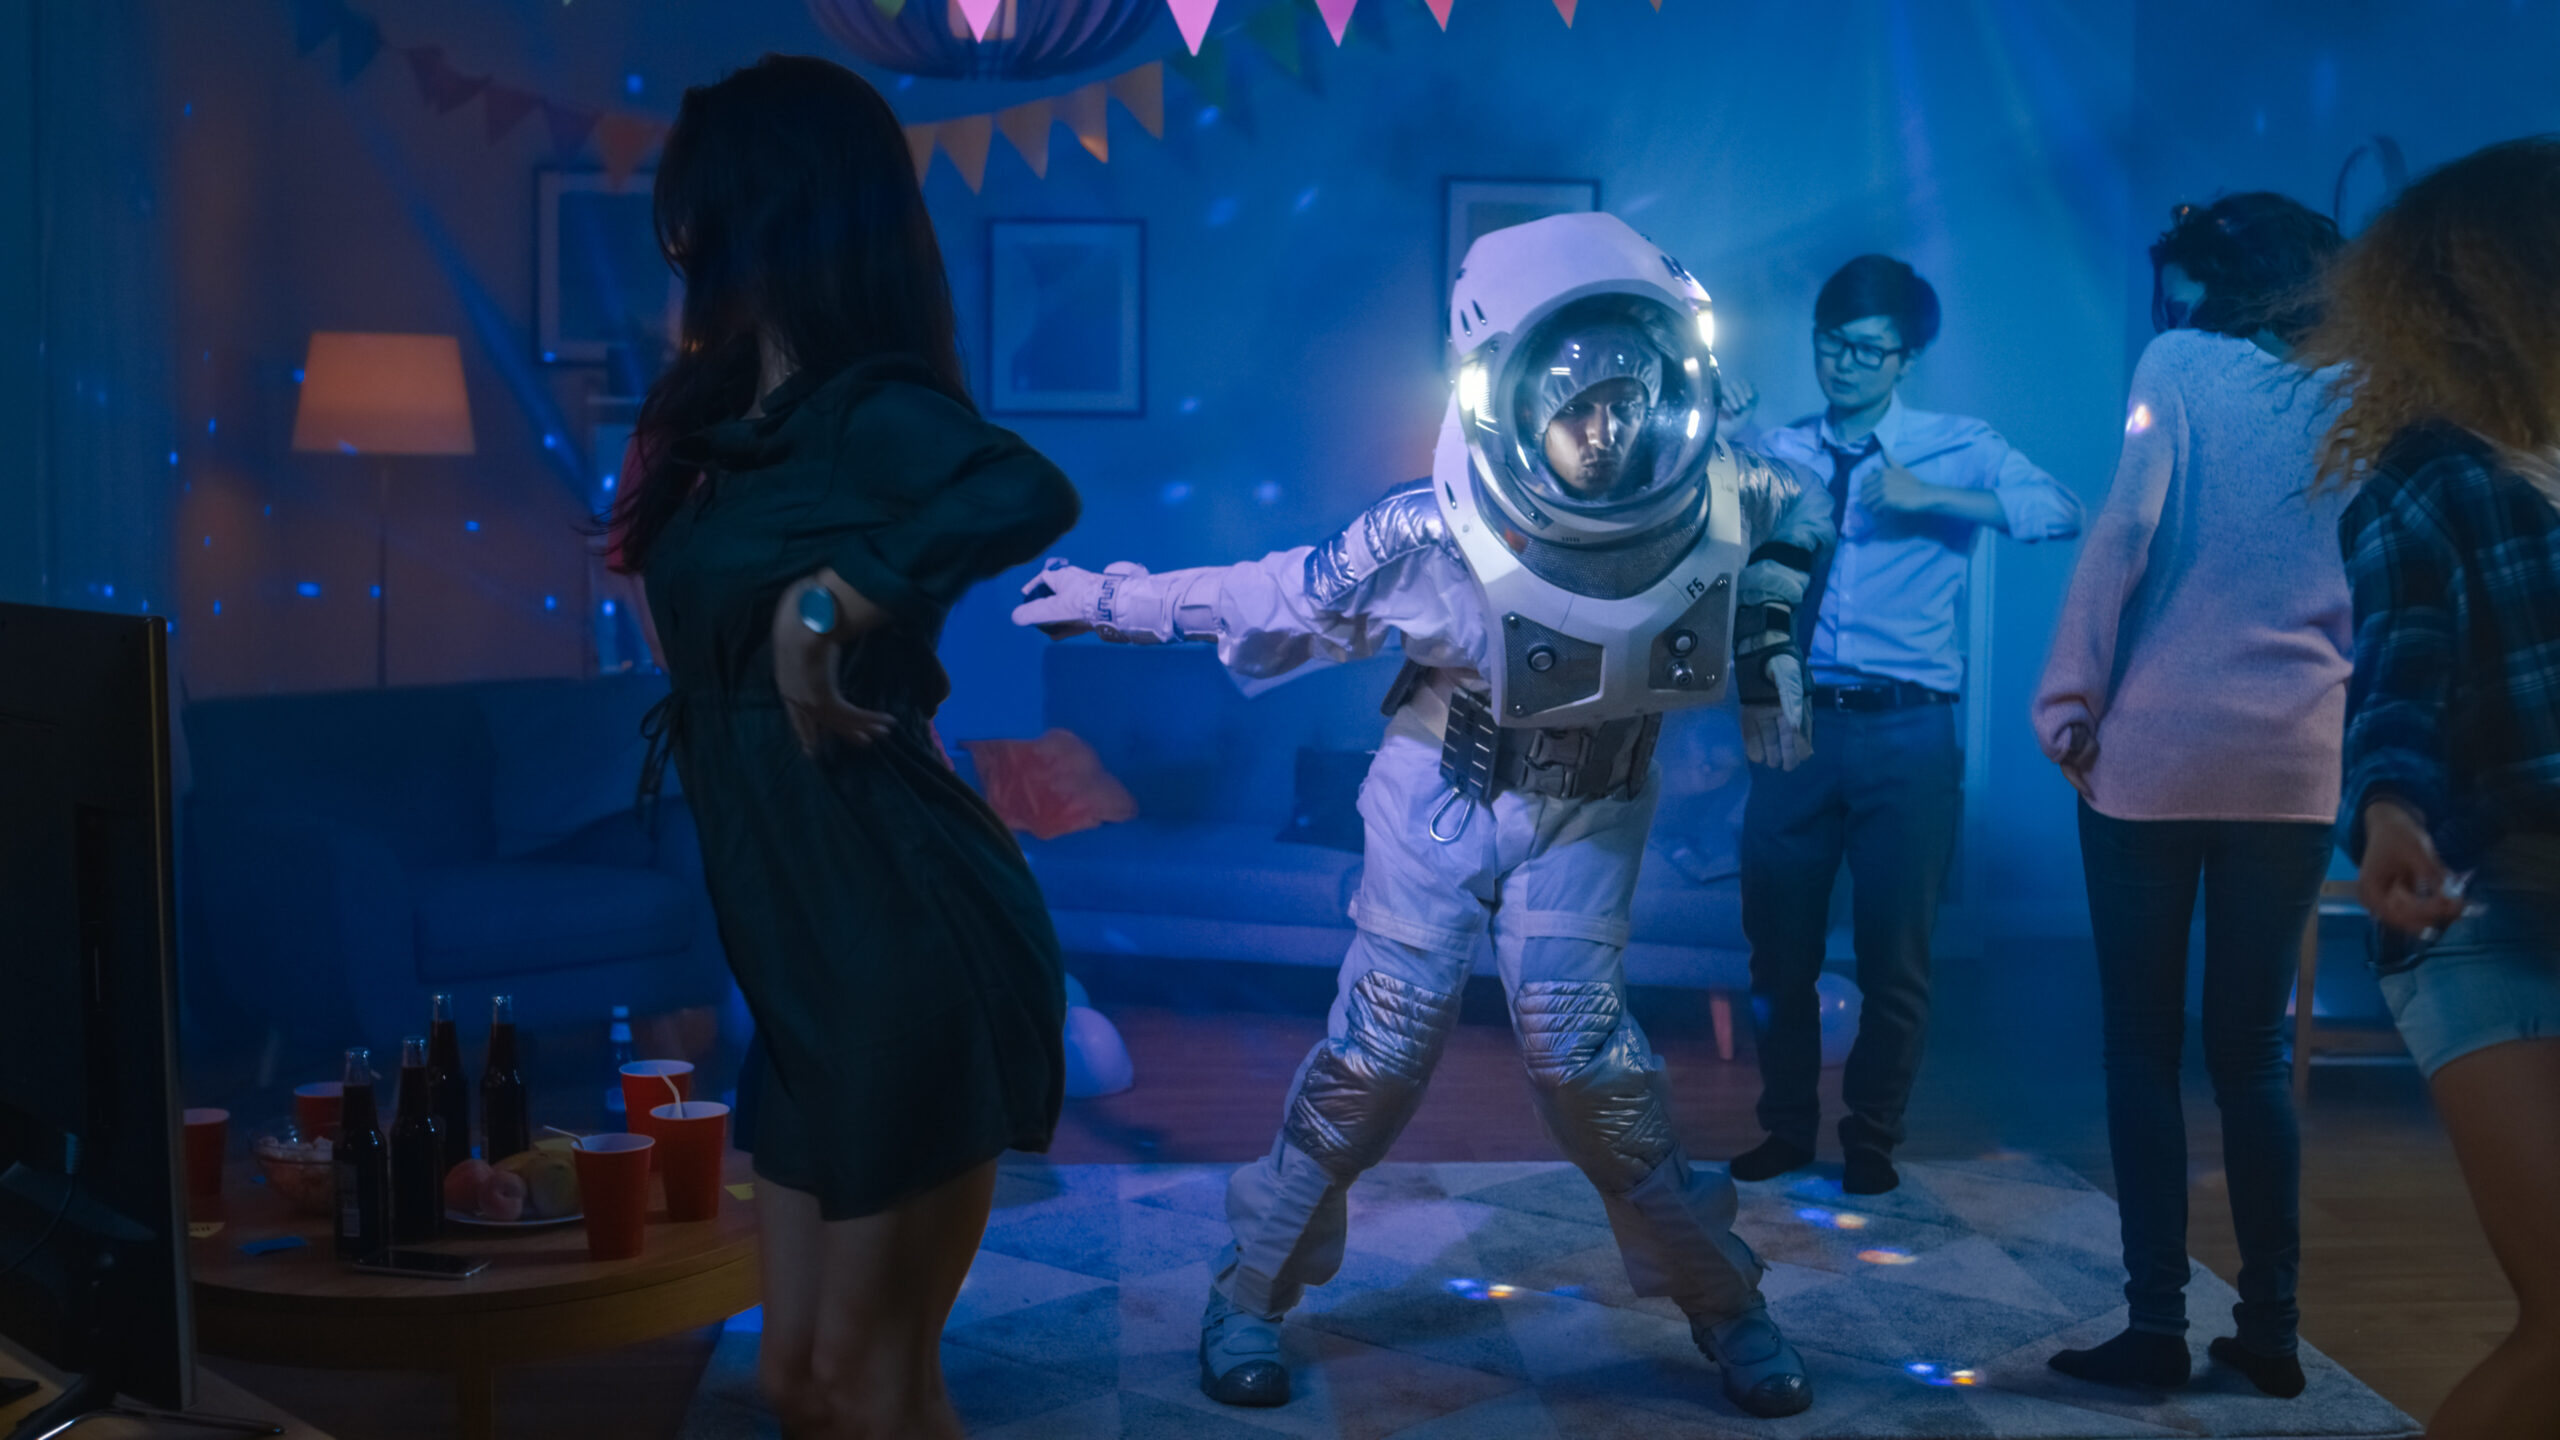 An astronaut dancing at a party with friends